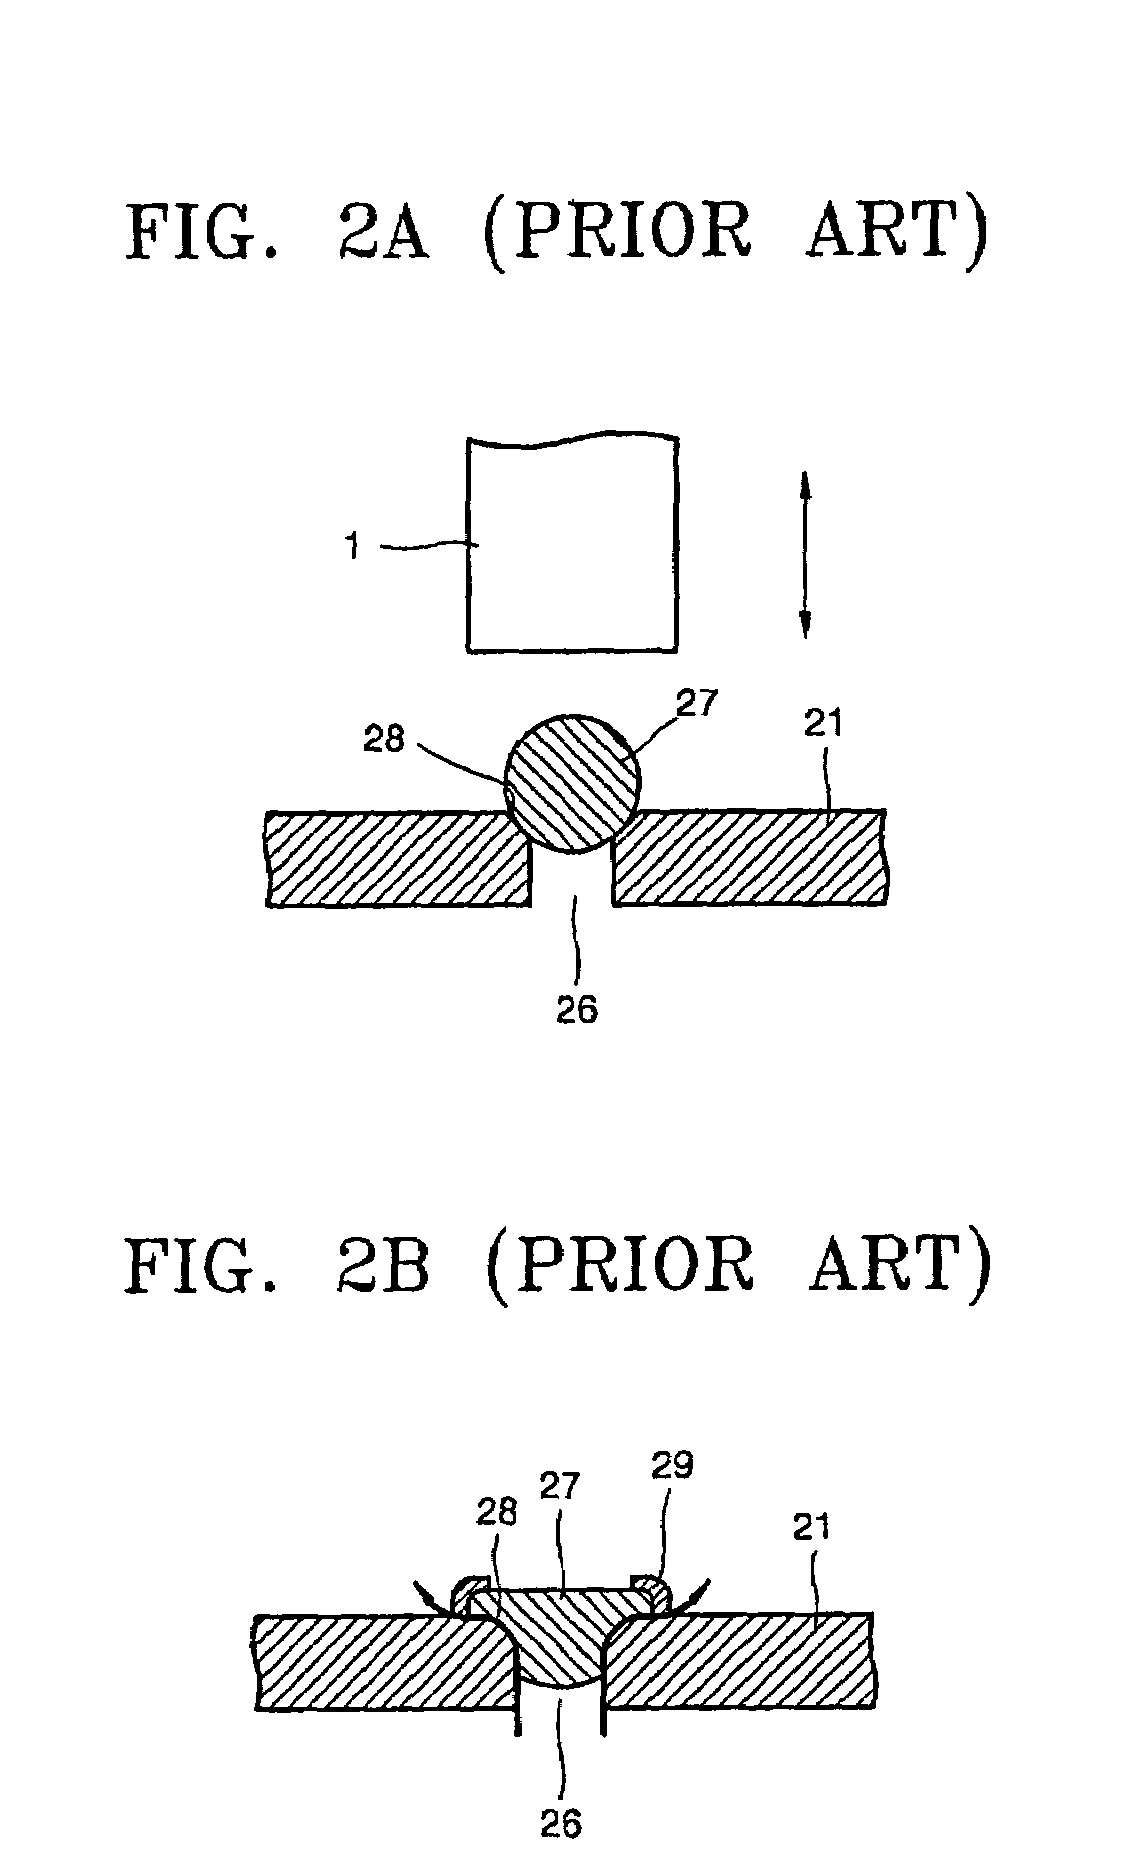 Secondary battery including improved cap assembly and plug for the secondary battery